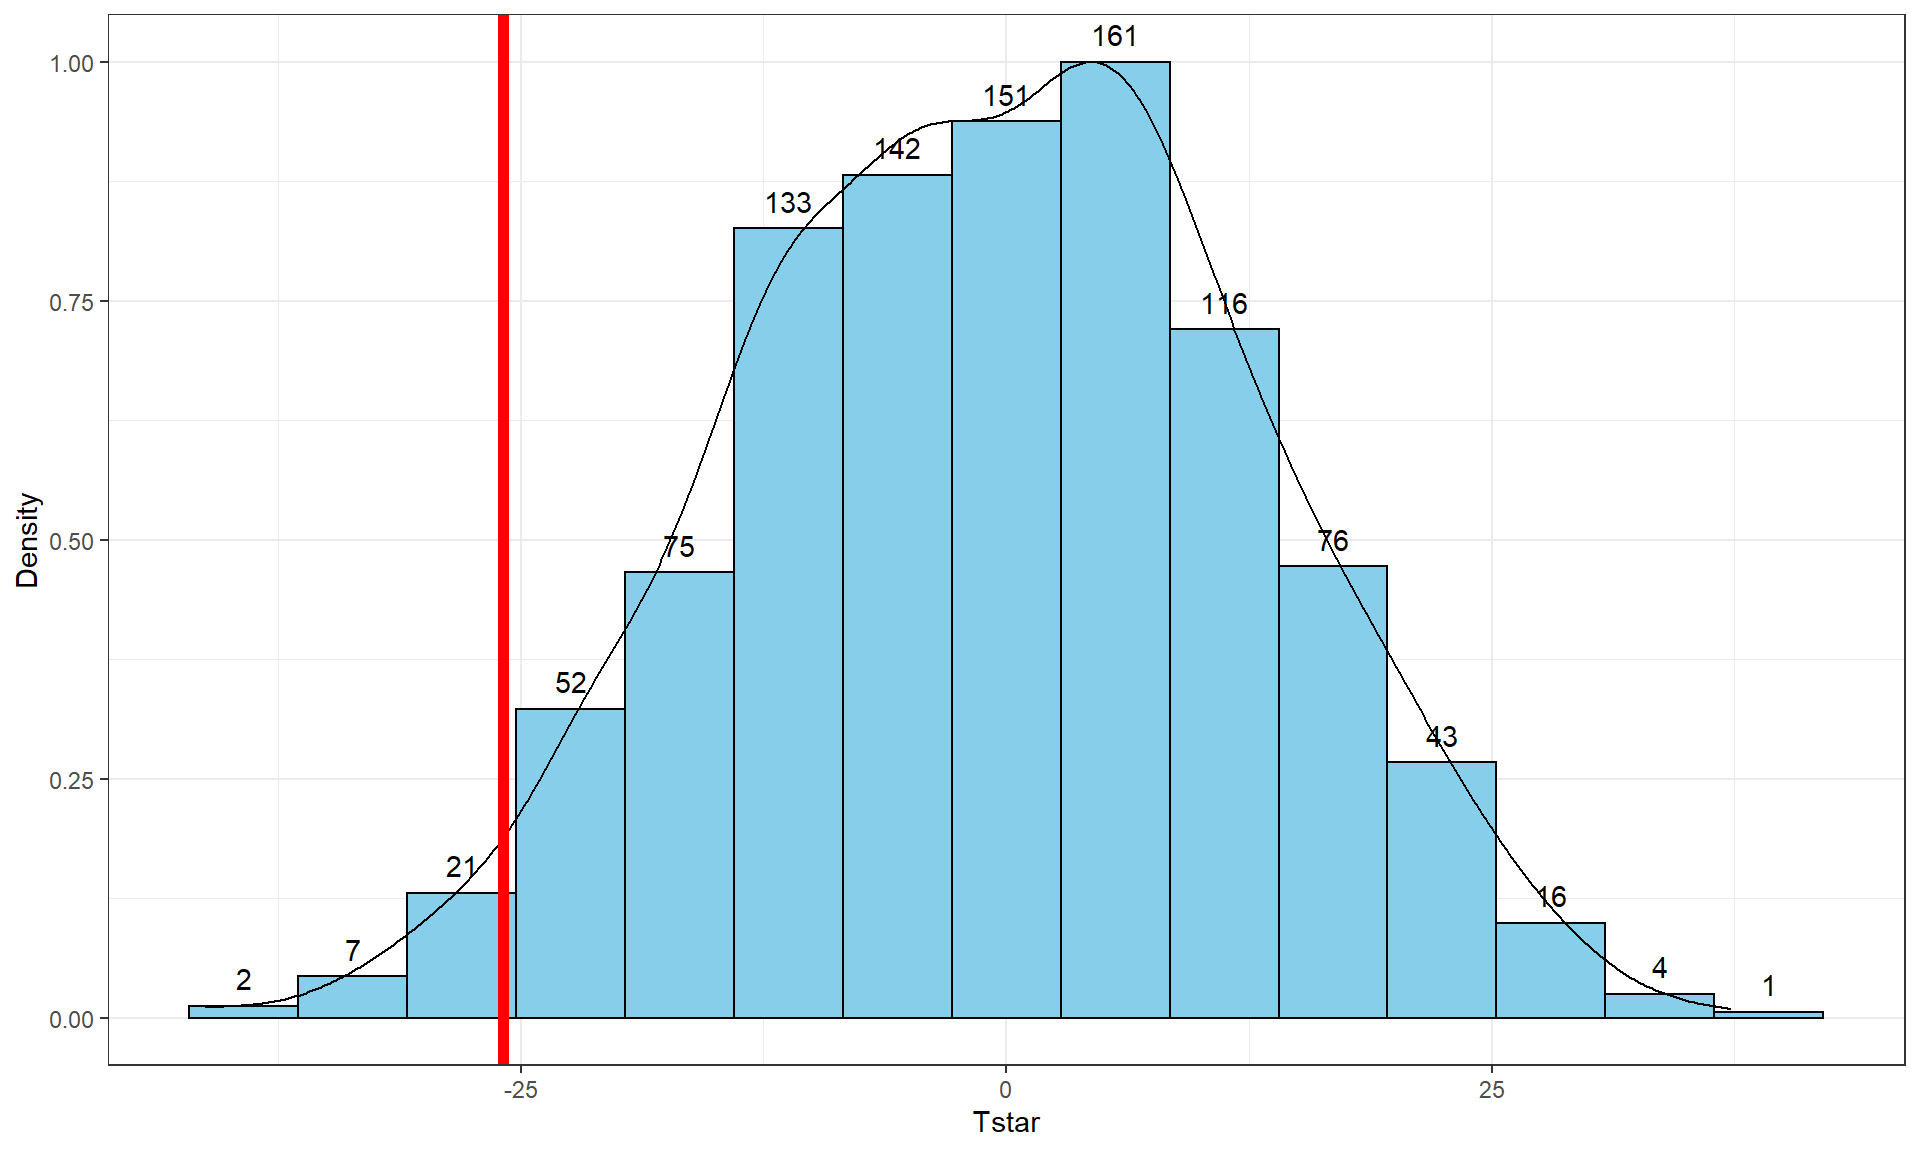 Histogram and density curve of values of test statistic for 1,000 permutations with bold vertical line for the value of observed test statistic.